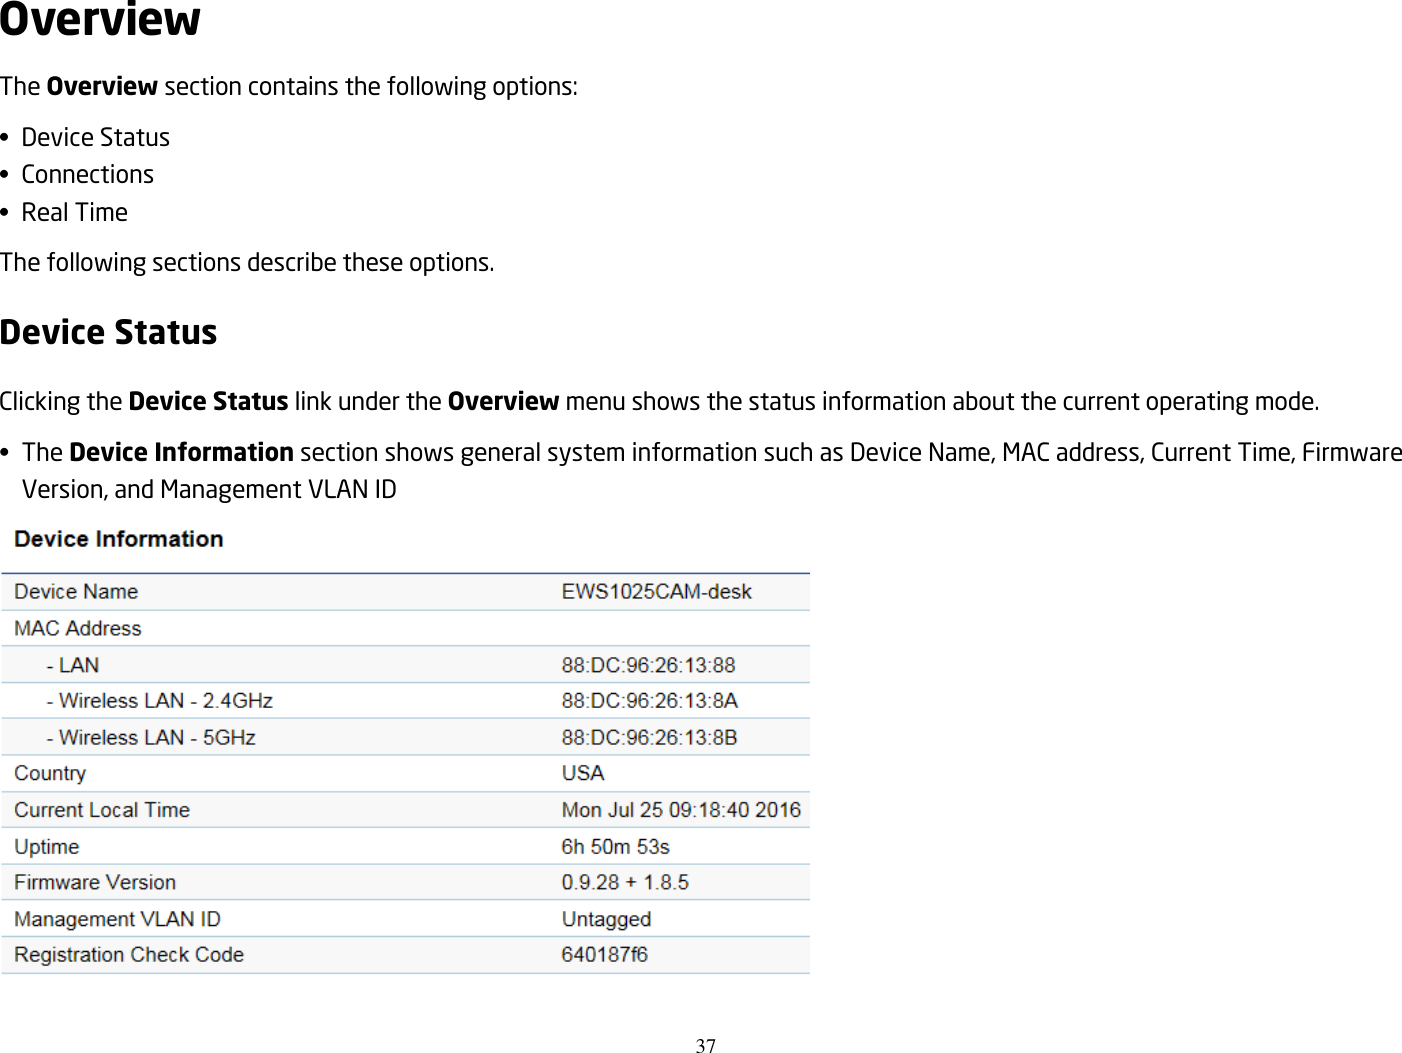 37  Overview The Overview section contains the following options: •  Device Status •  Connections •  Real Time The following sections describe these options. Device Status Clicking the Device Status link under the Overview menu shows the status information about the current operating mode. •  The Device Information section shows general system information such as Device Name, MAC address, Current Time, Firmware Version, and Management VLAN ID   